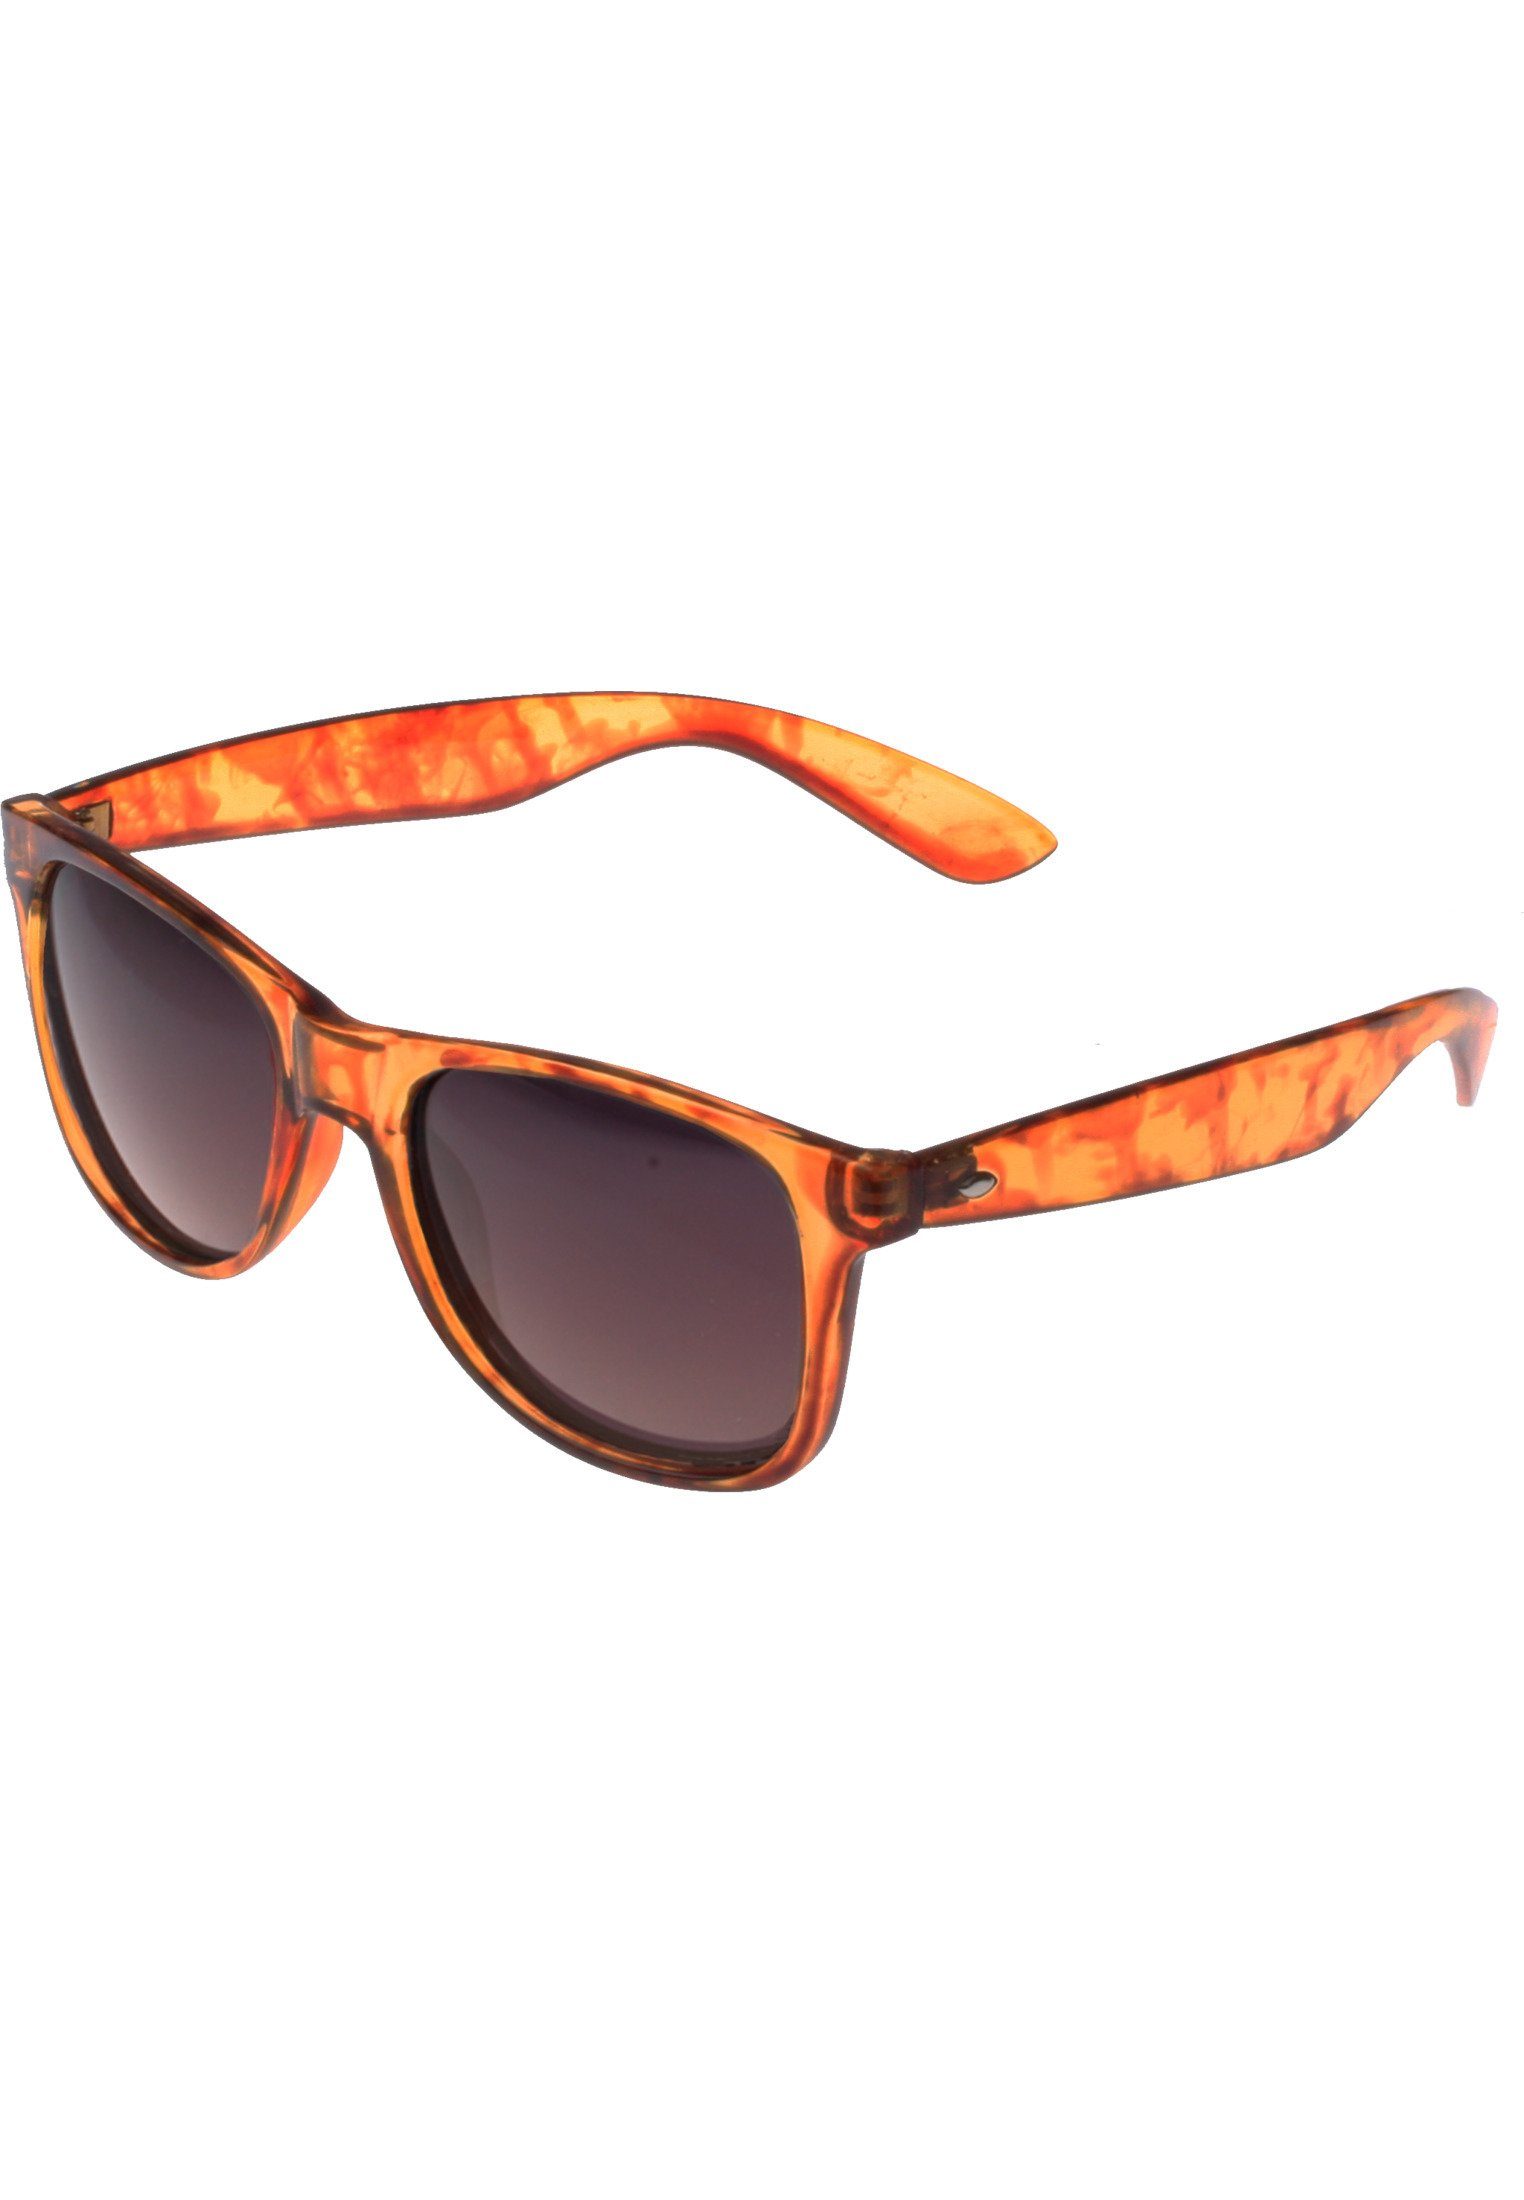 MSTRDS Sonnenbrille amber Shades Accessoires Groove GStwo